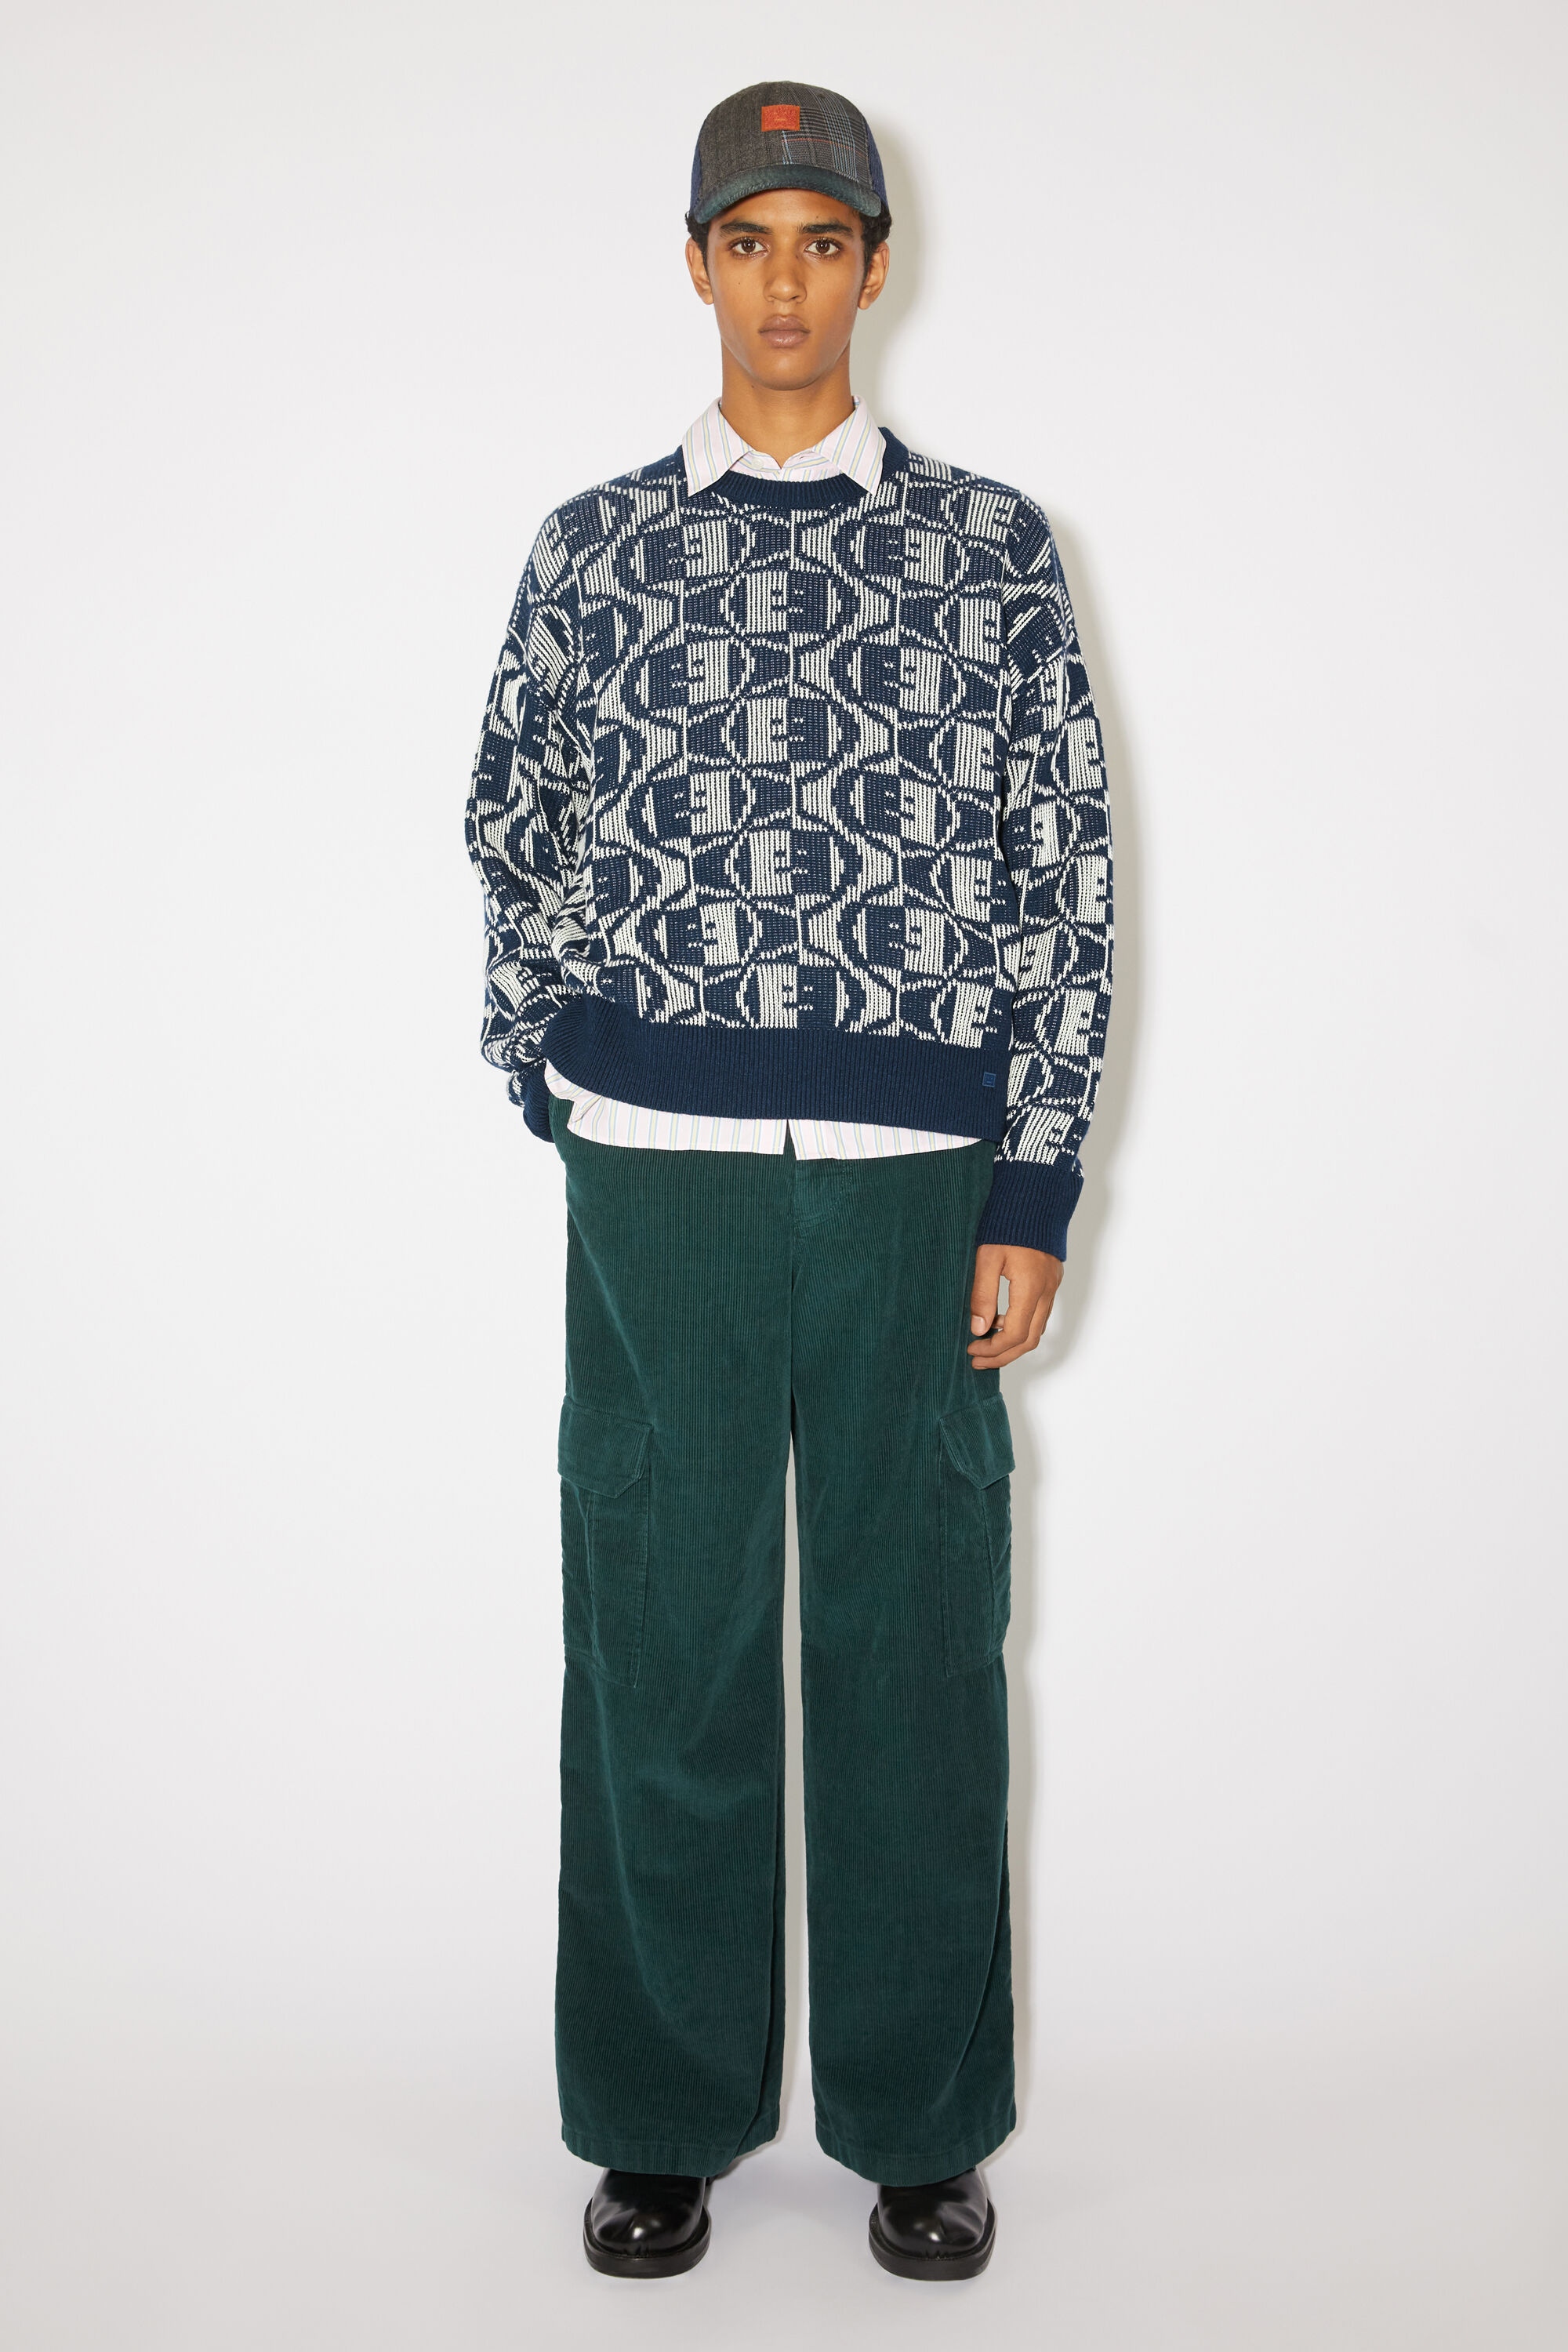 Acne Studios Face Collection - Shop men's clothing and accessories